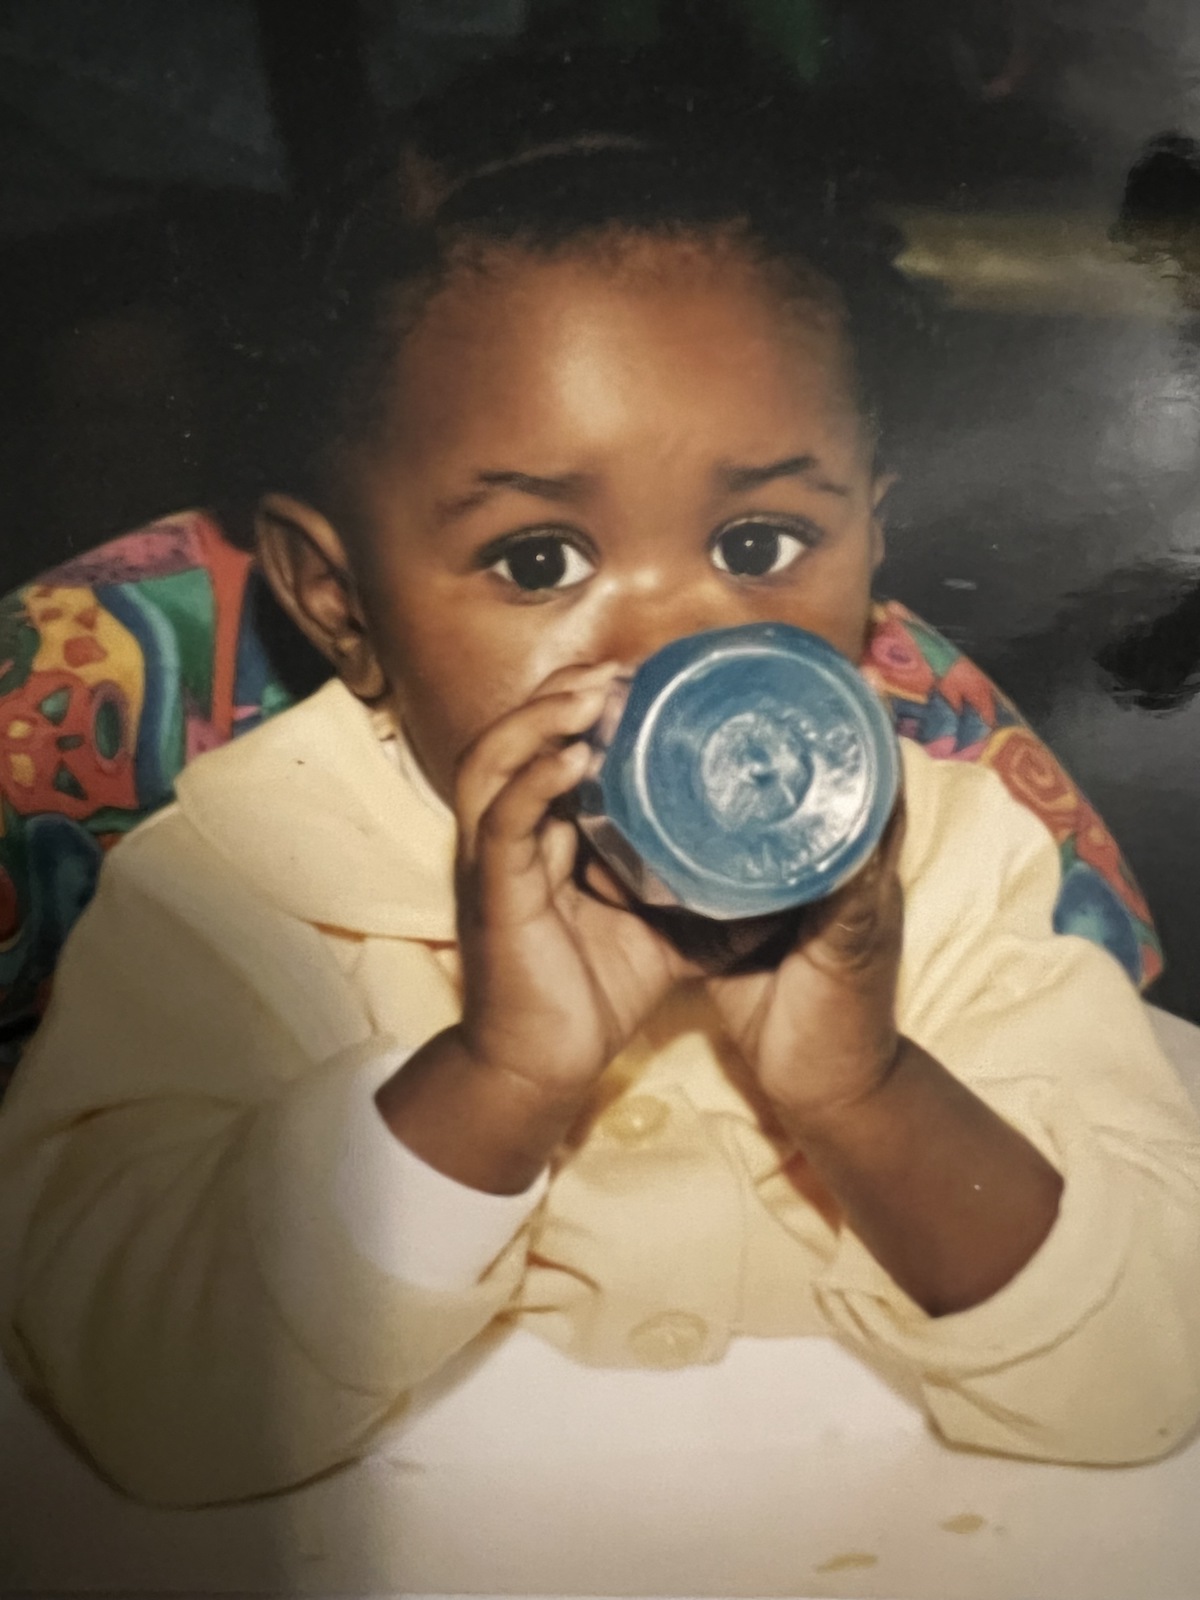 Baby Kristen looks at the camera while drinking from a bottle